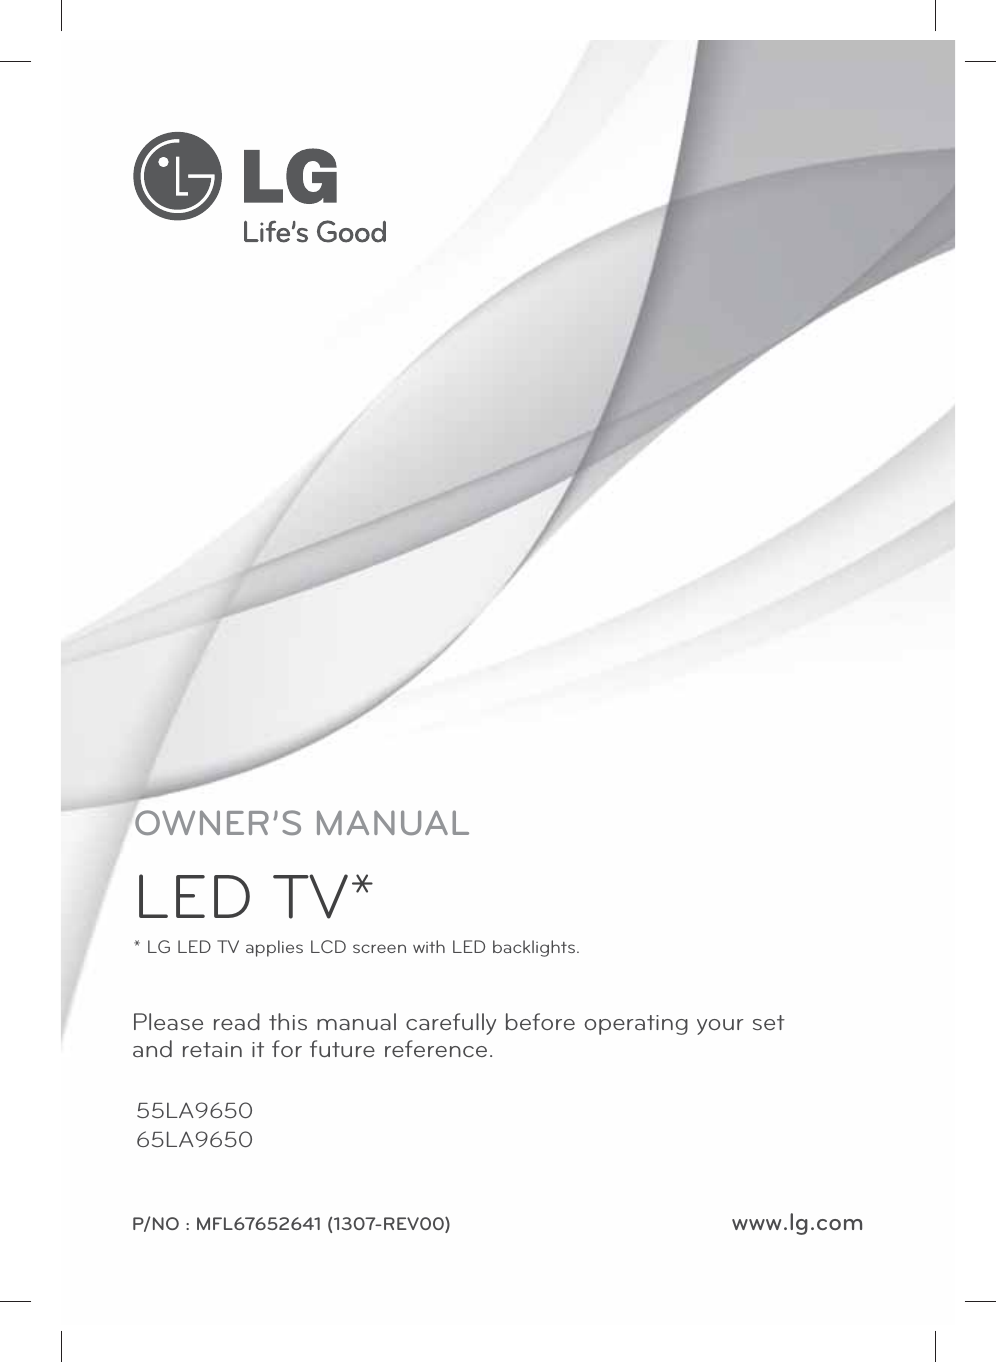 www.lg.comPlease read this manual carefully before operating your set and retain it for future reference.OWNER’S MANUALLED TV** LG LED TV applies LCD screen with LED backlights.55LA965065LA9650P/NO : MFL67652641 (1307-REV00)